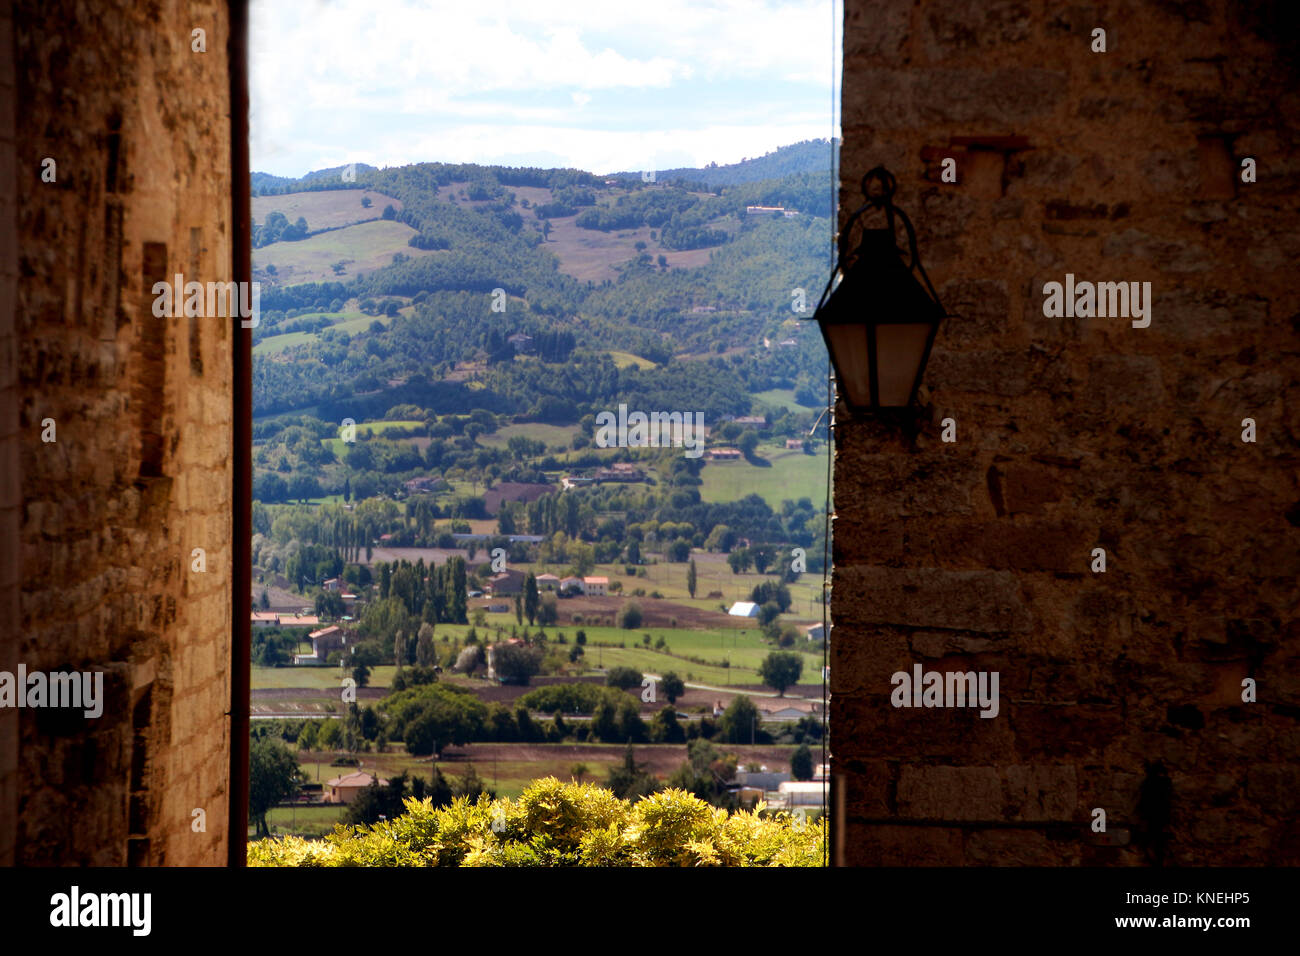 Rural landscape view between two buildings, Italy Stock Photo